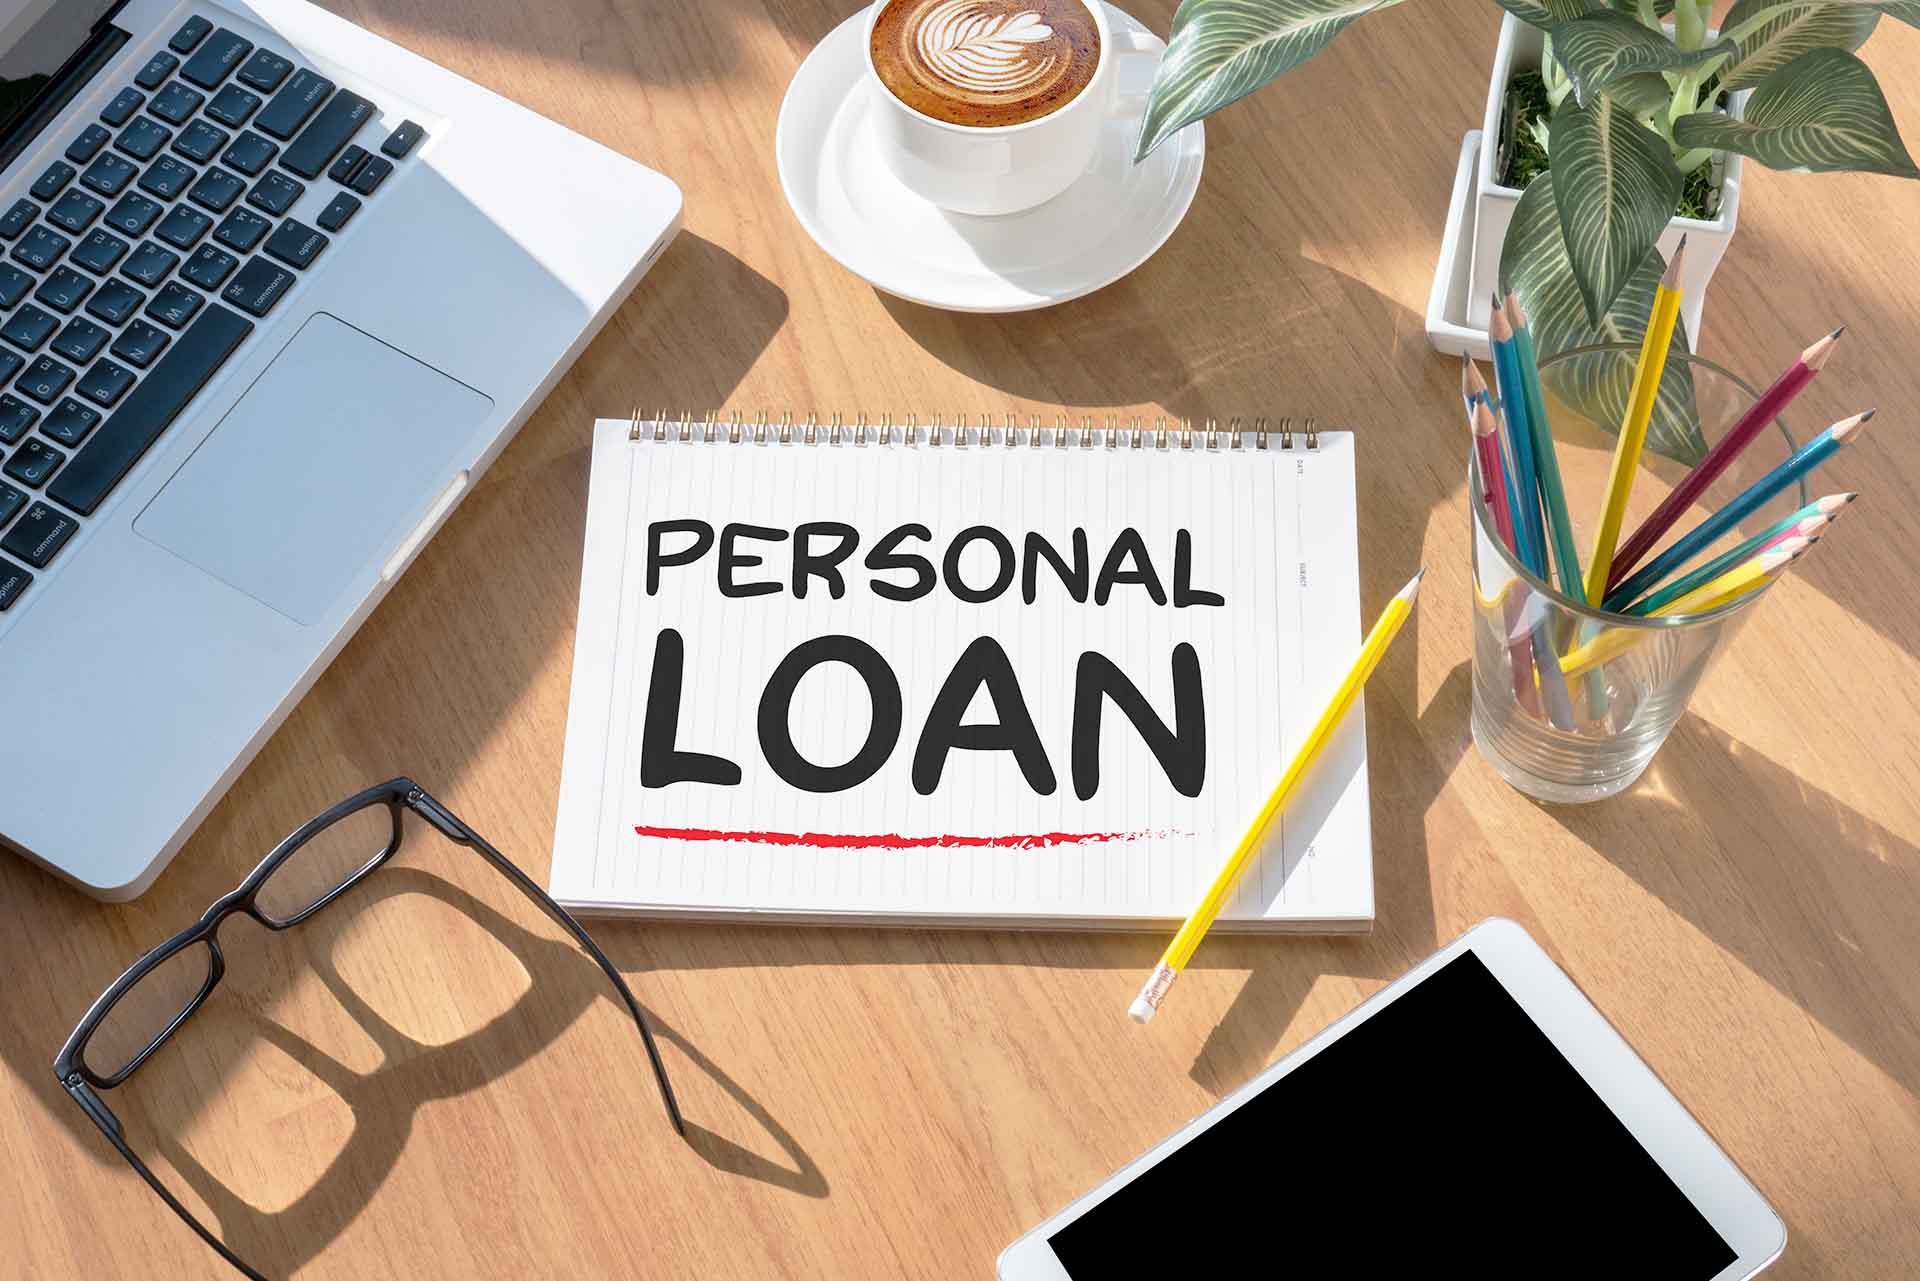 Personal loan early payoff 